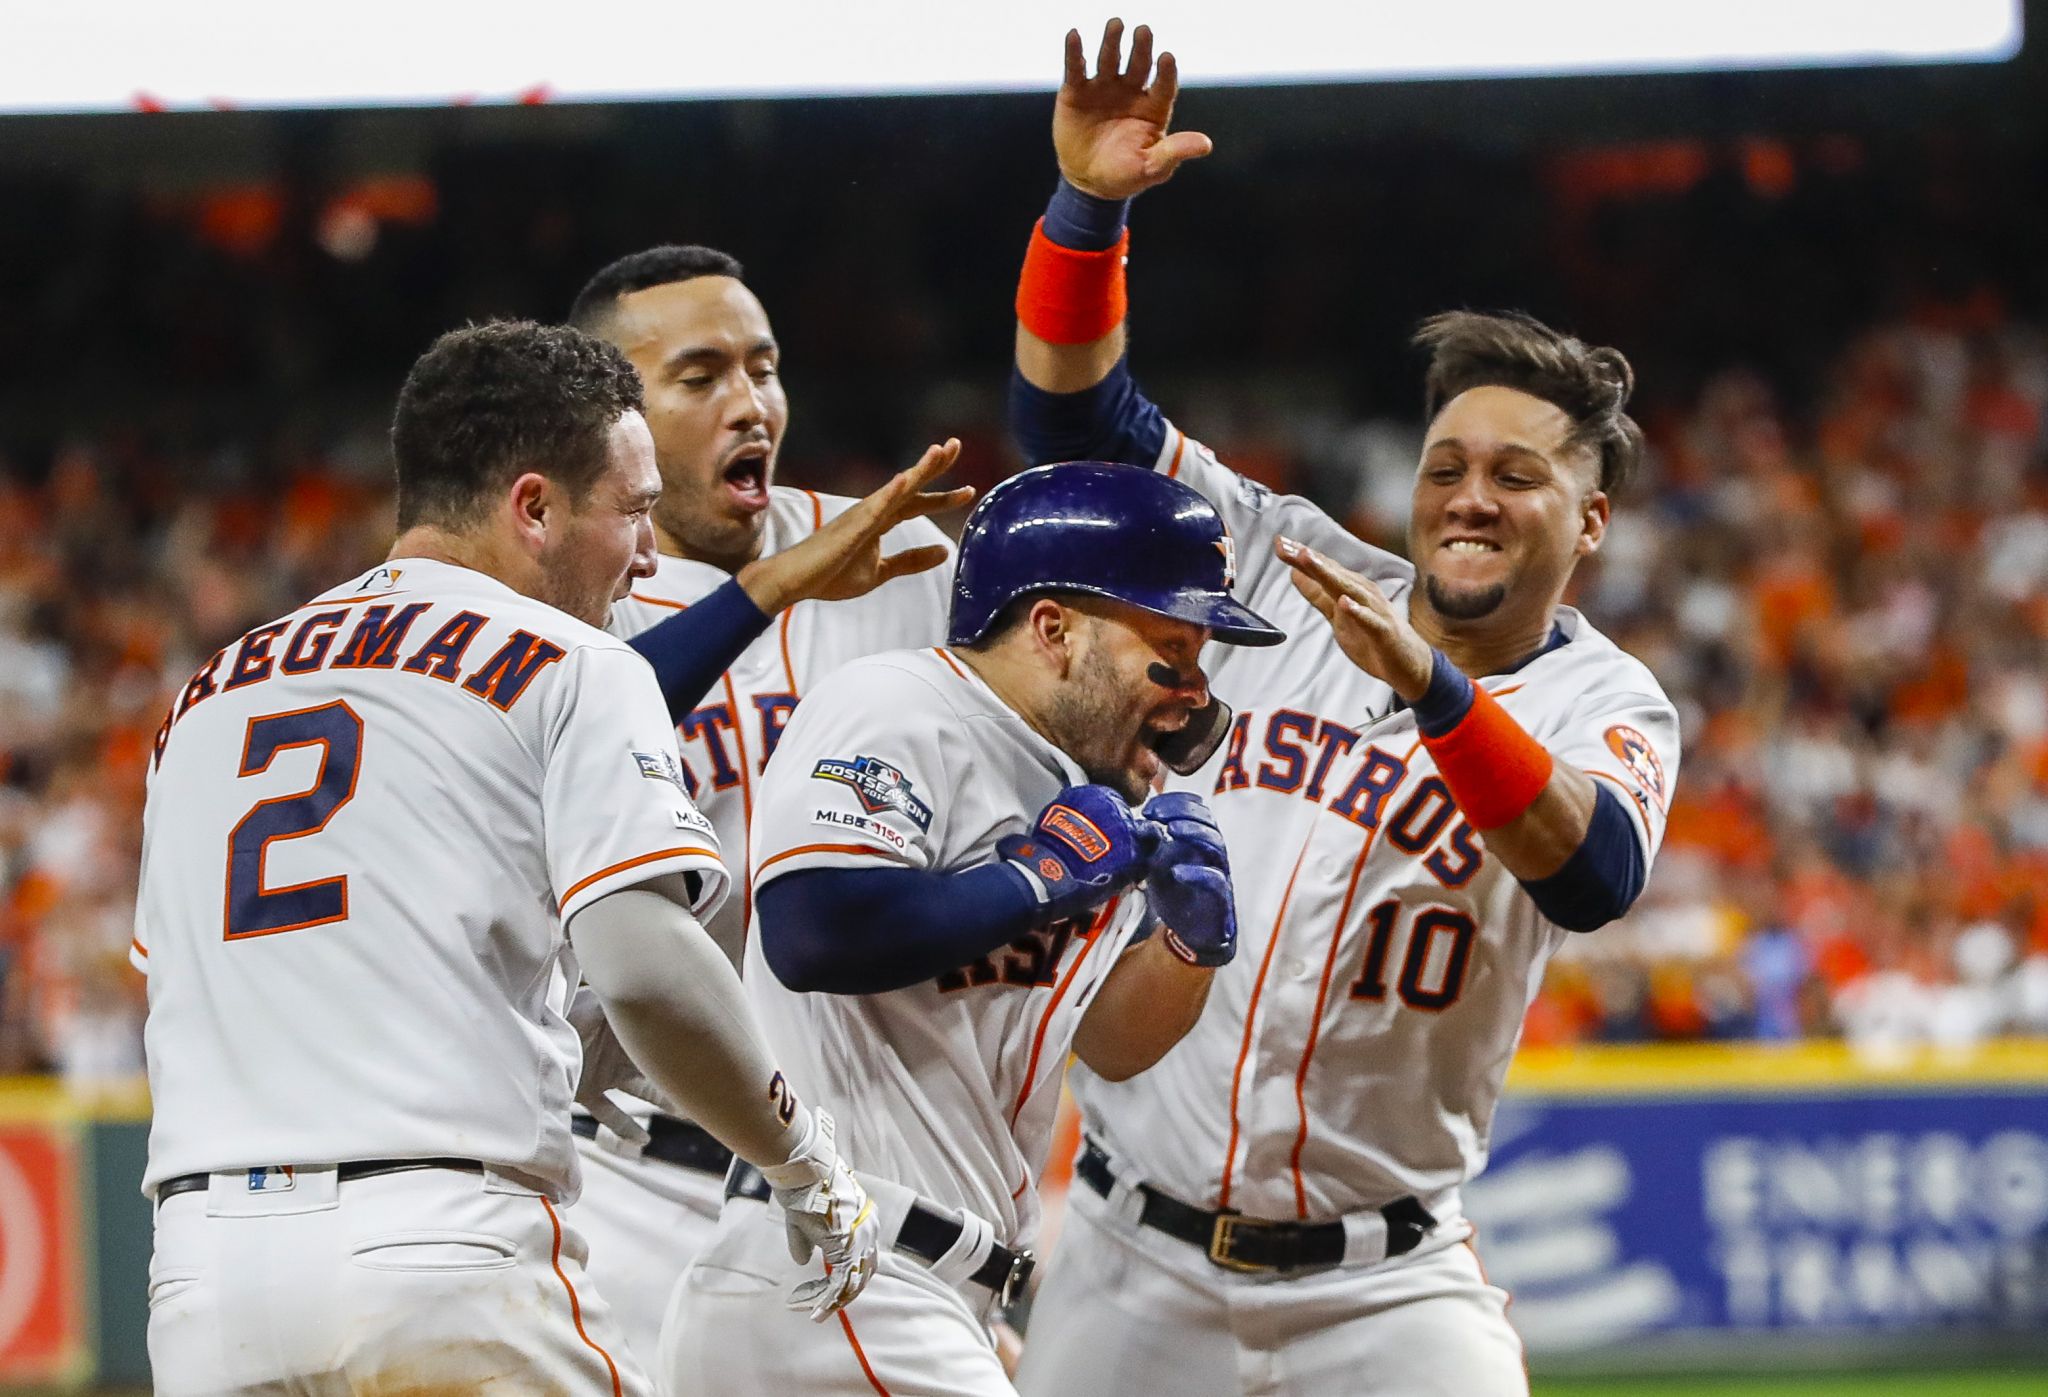 Elation and heartbreak: The Astros' history in Game 6 of playoff